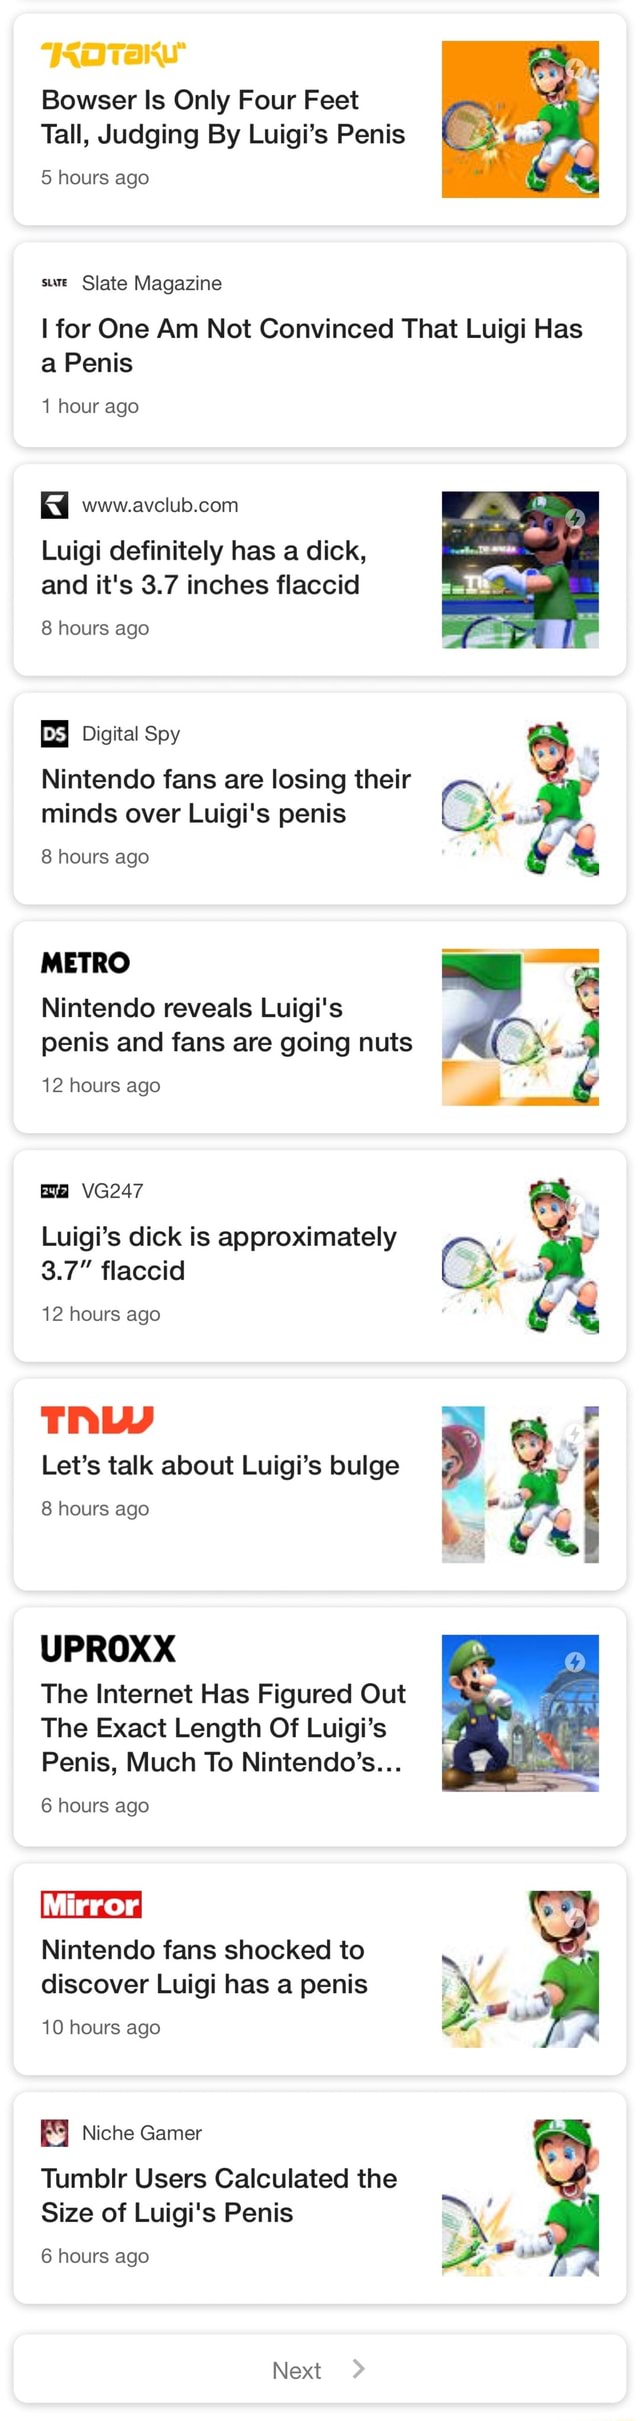 Bowser Is Only Four Feet Tall, Judging By Luigi�s Penis 5 hours ago smE ... Xxx Pic Hd